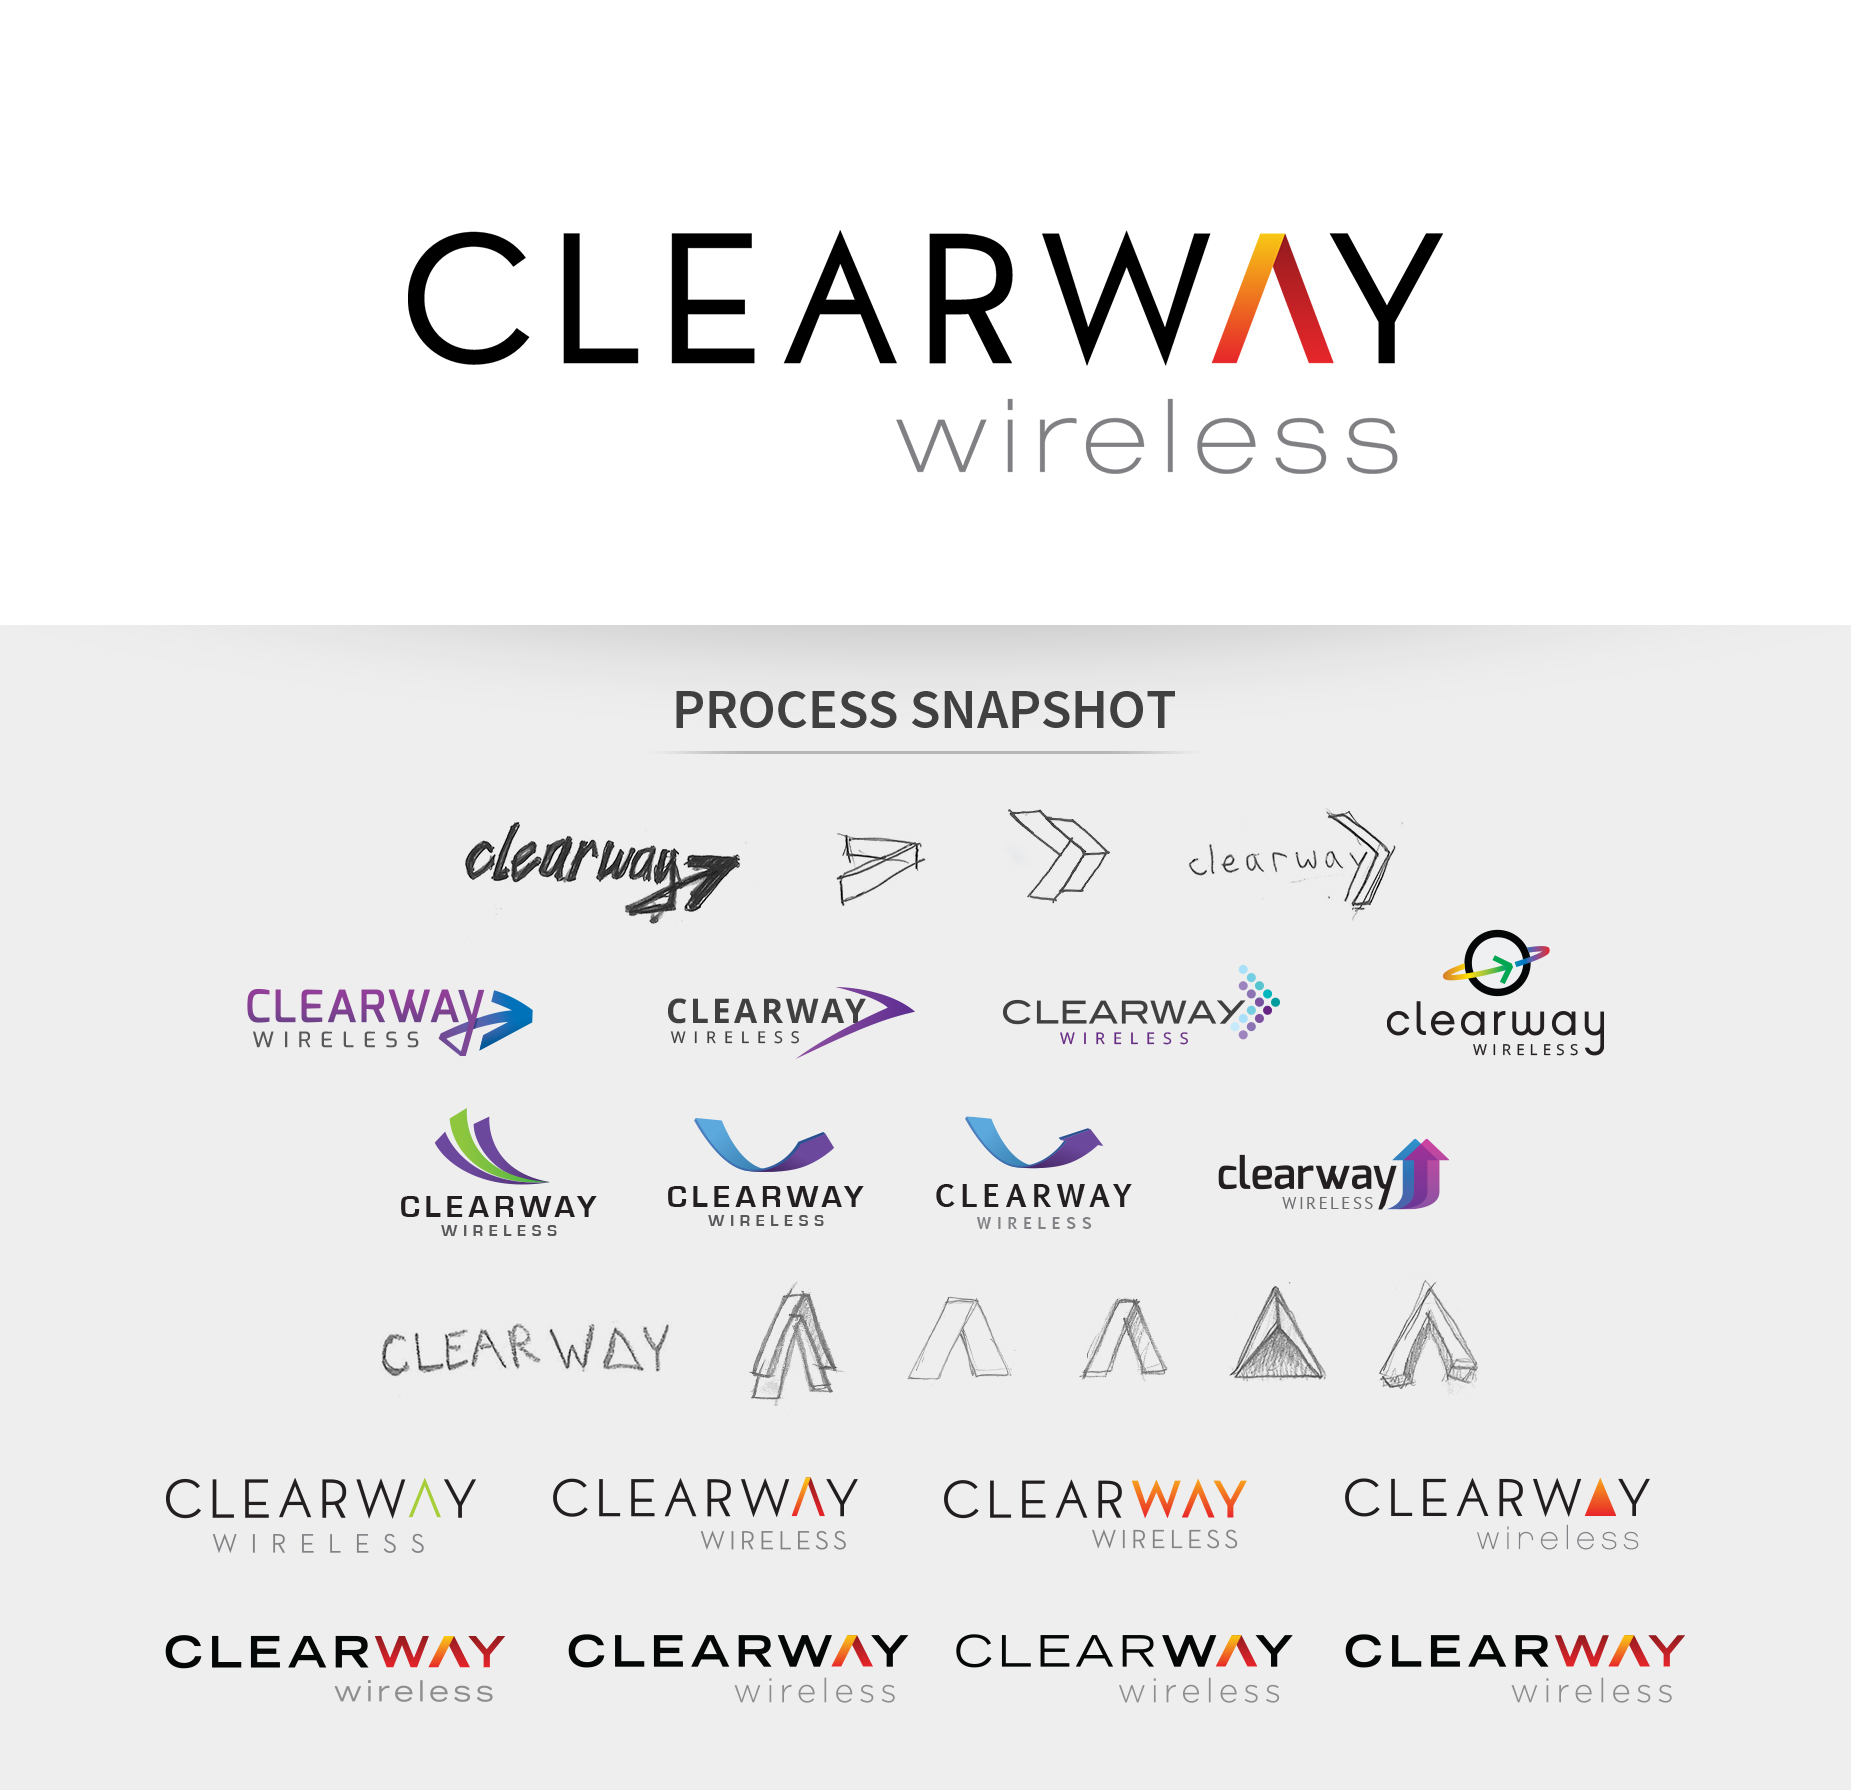 Clearway logo branding and process snapshot